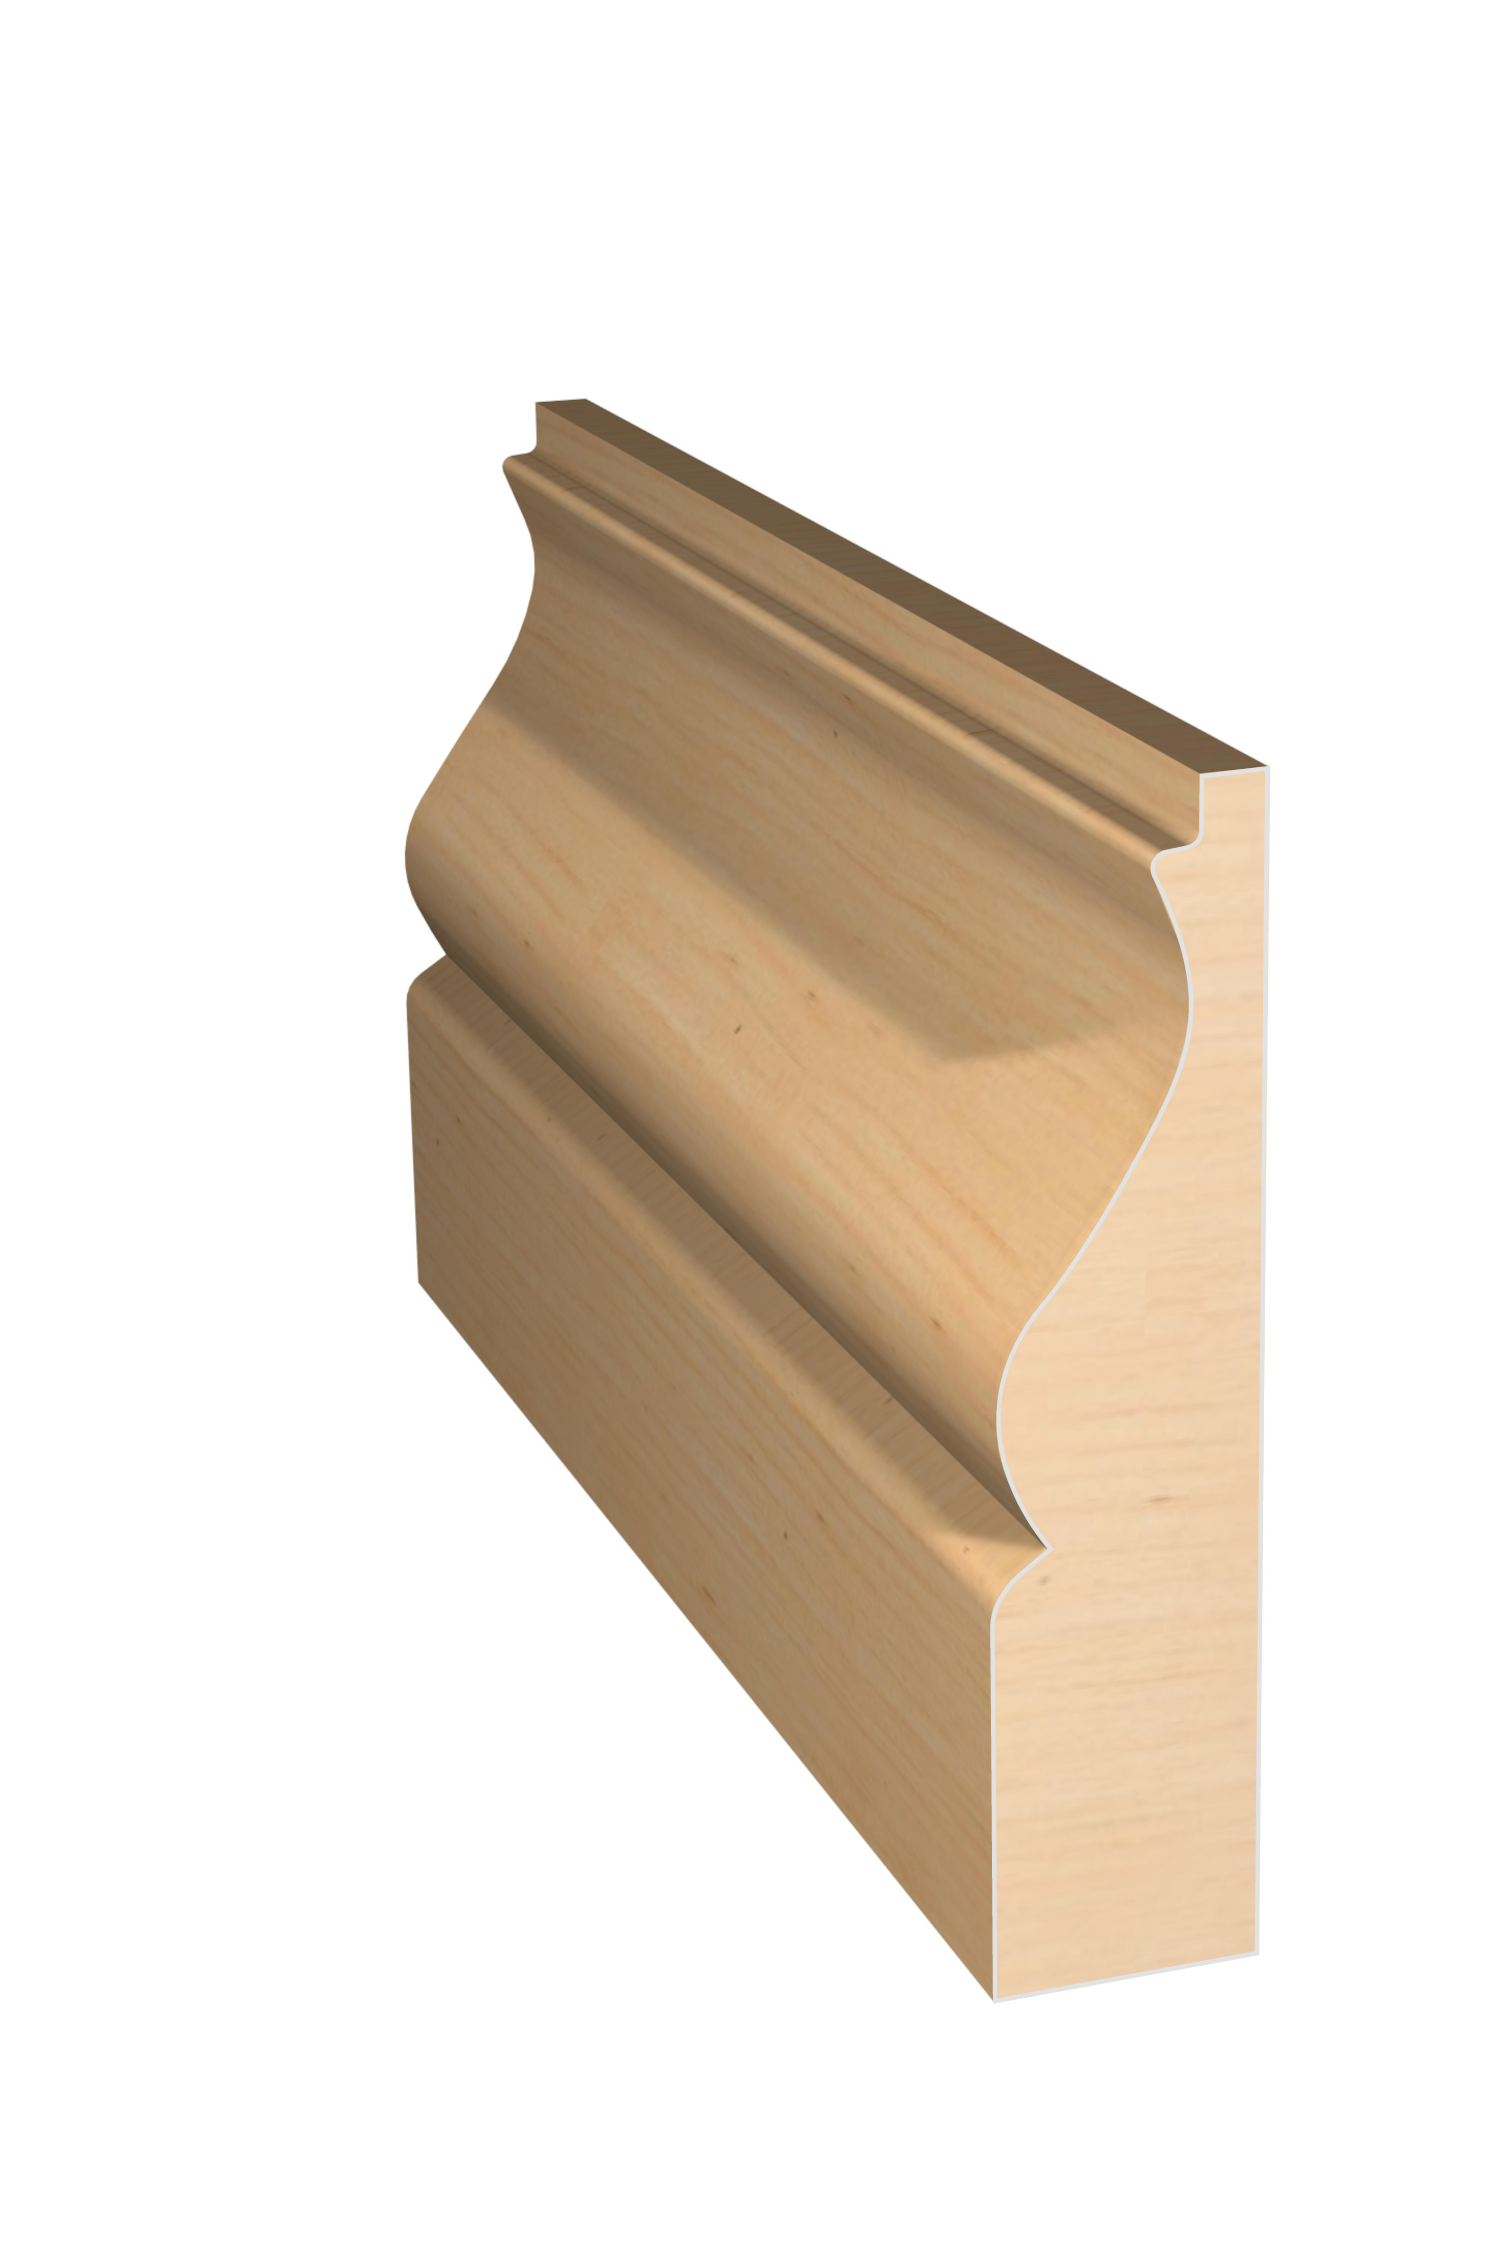 Three dimensional rendering of custom casing wood molding CAPL3141 made by Public Lumber Company in Detroit.